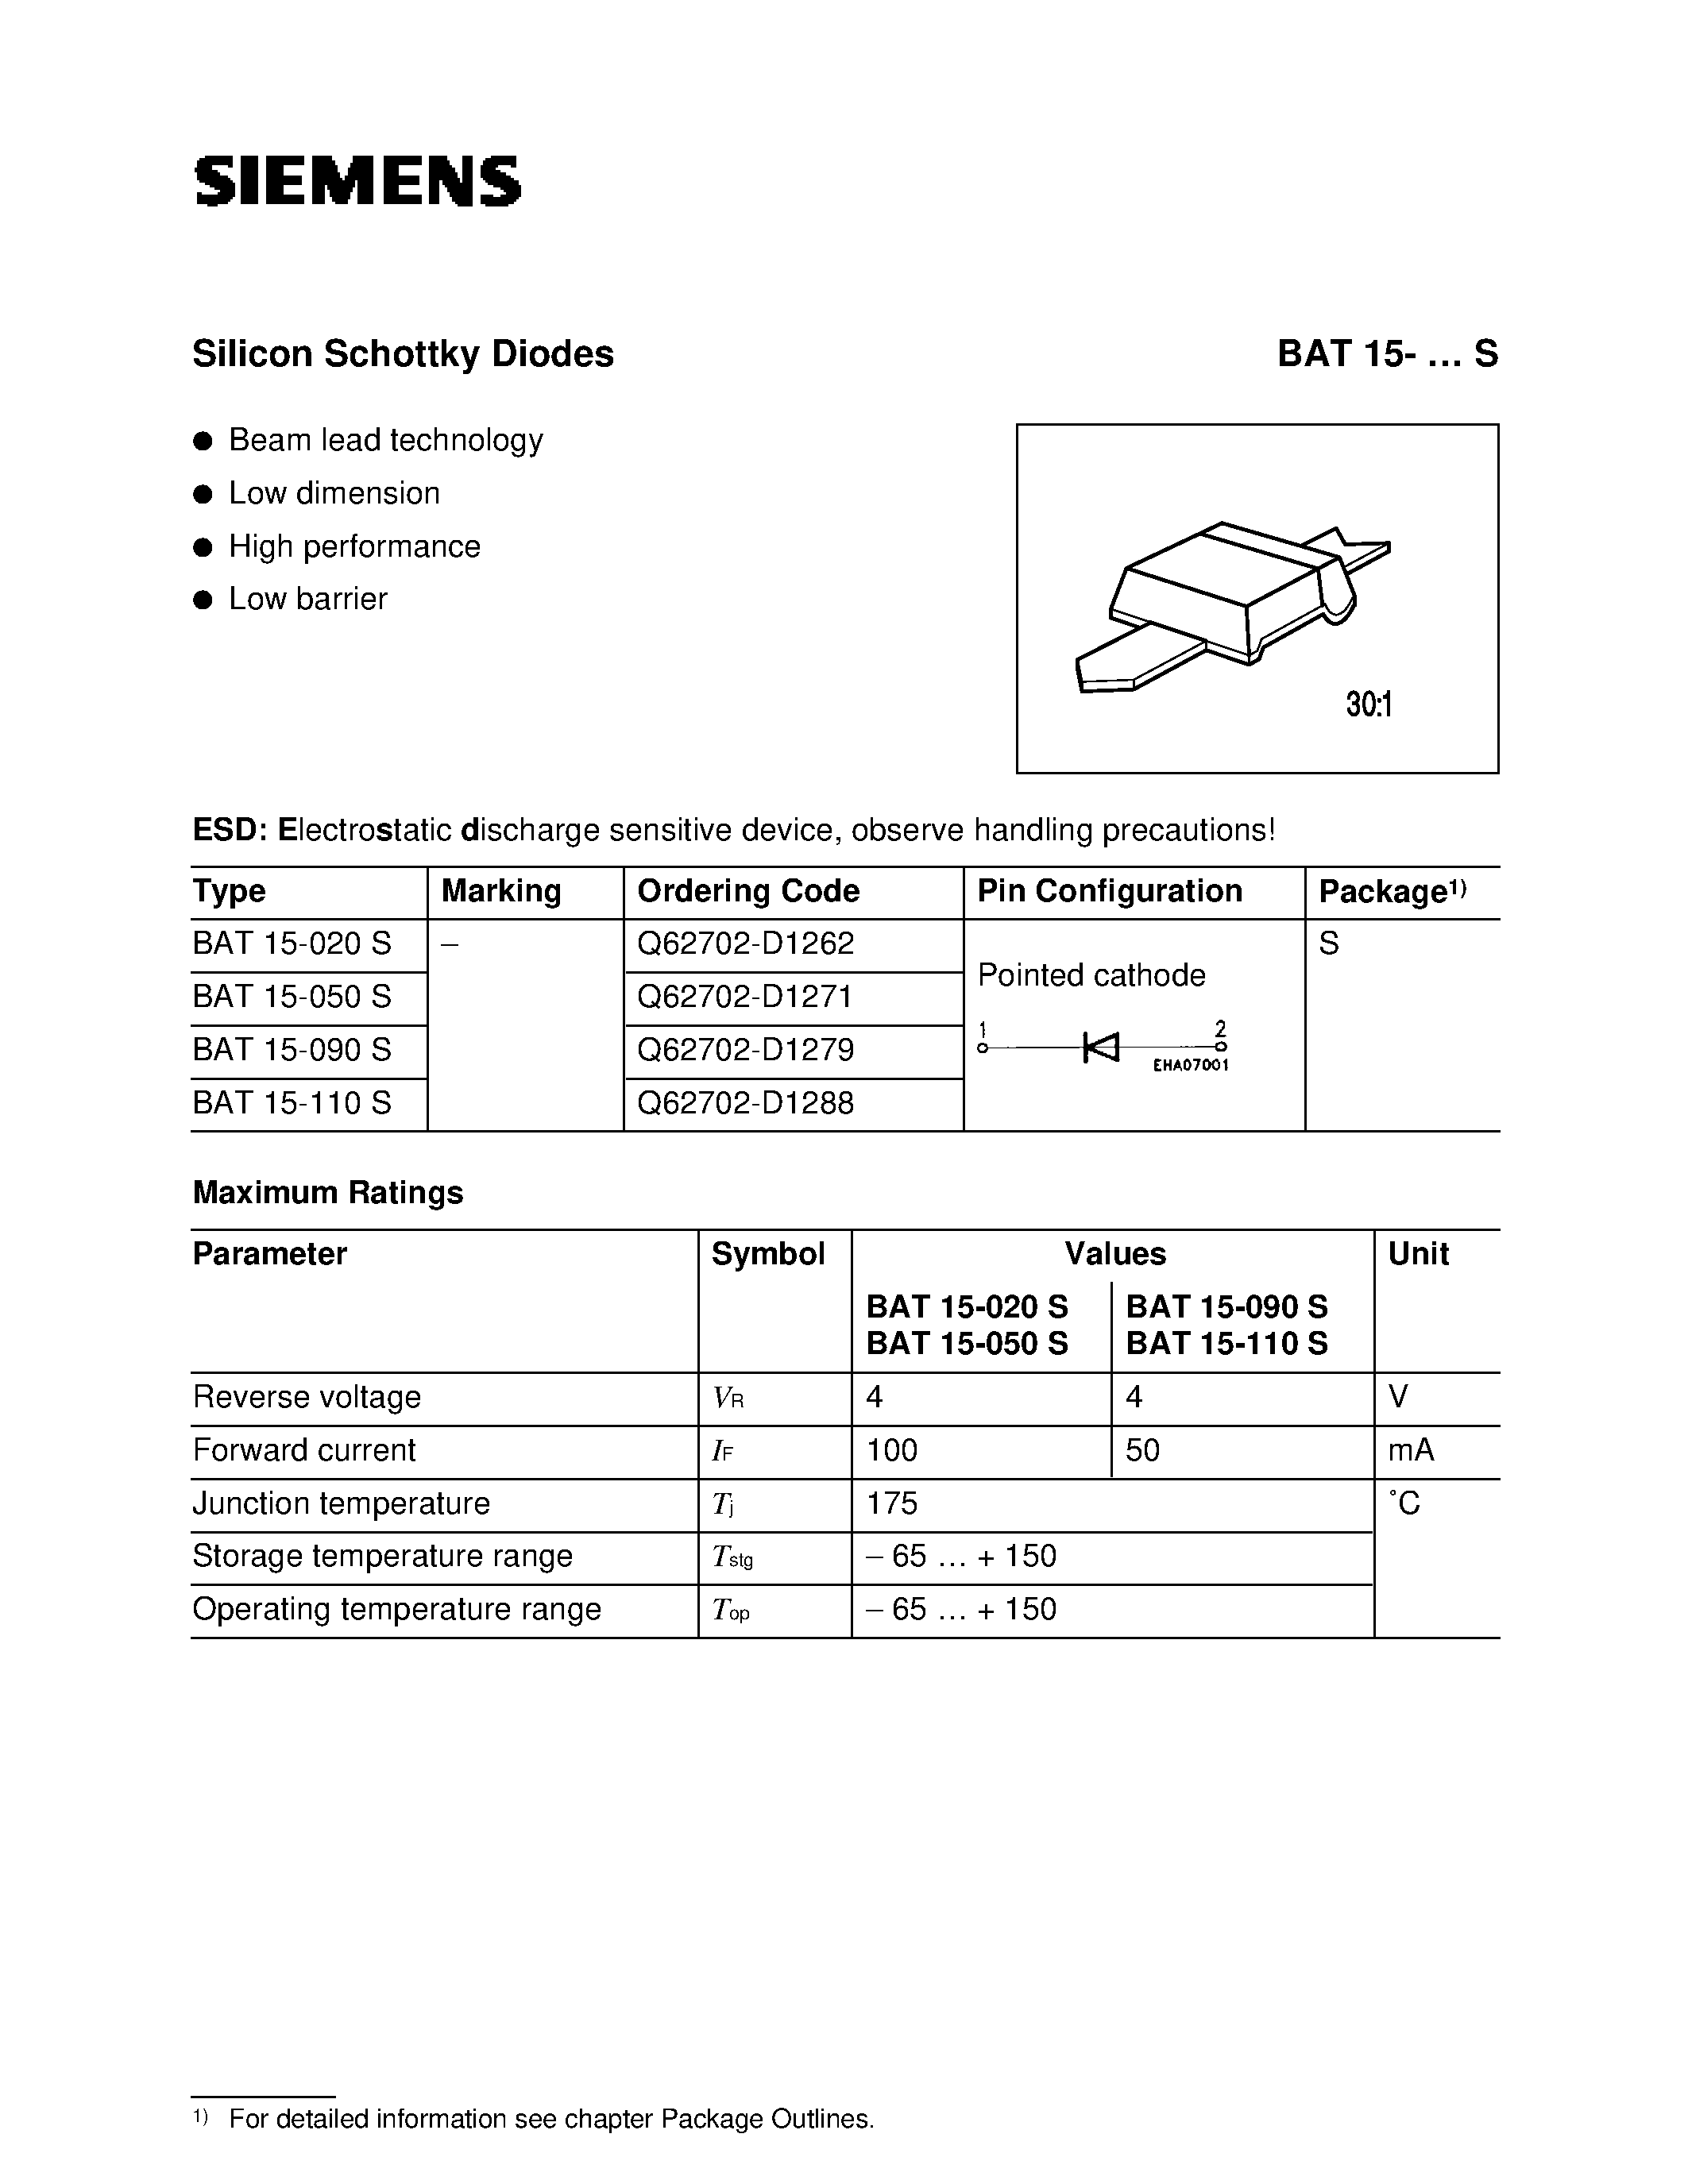 Datasheet BAT15-110S - Silicon Schottky Diodes (Beam lead technology Low dimension High performance Low barrier) page 1